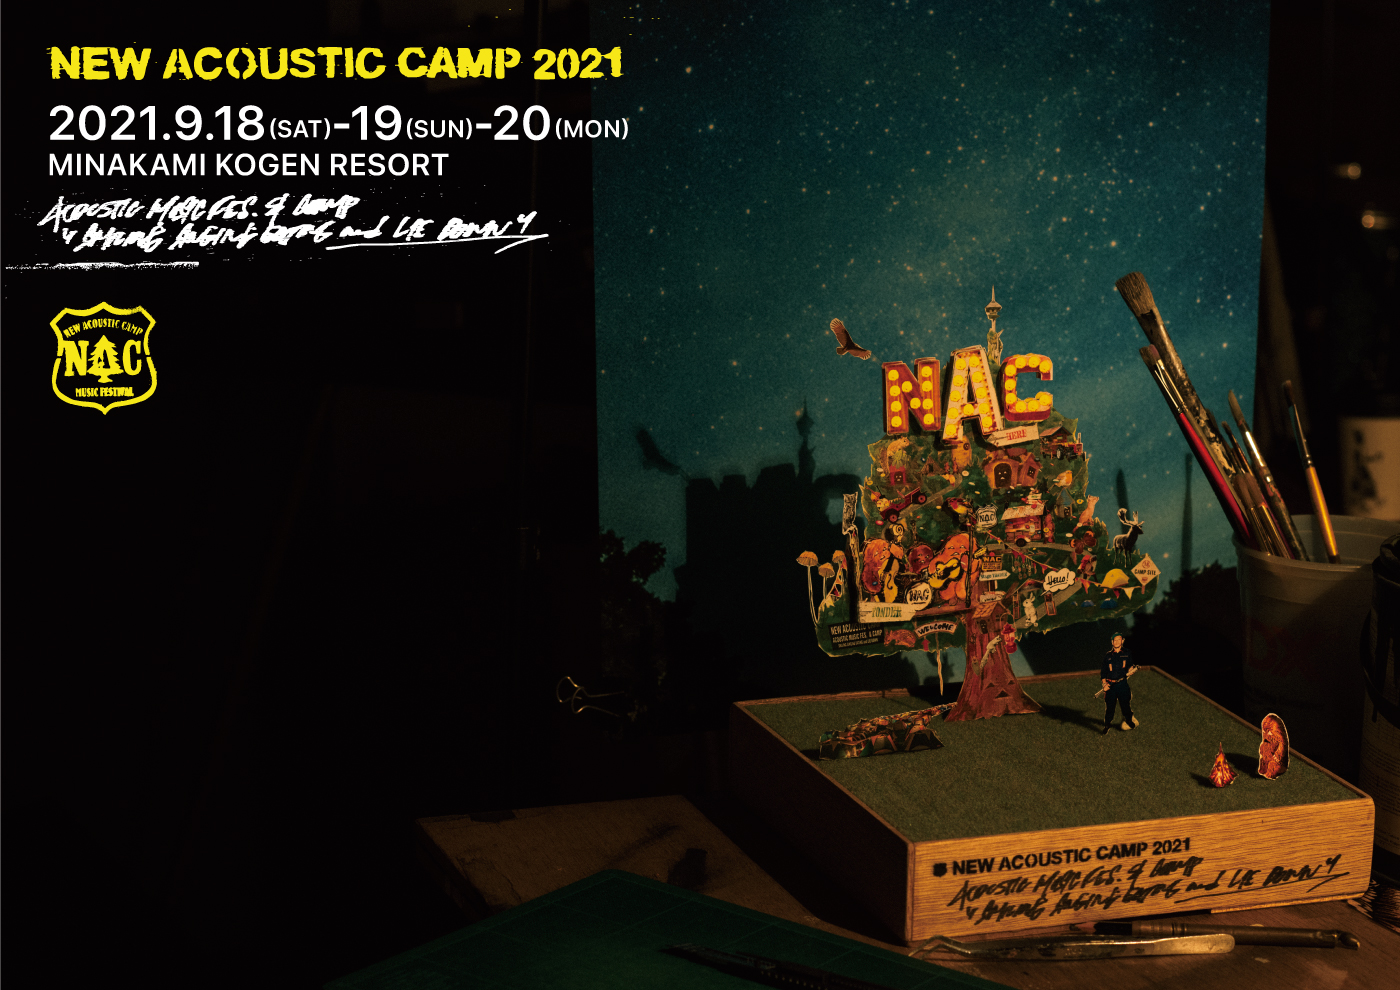 New Acoustic Camp 2021 | ニューアコ 2021